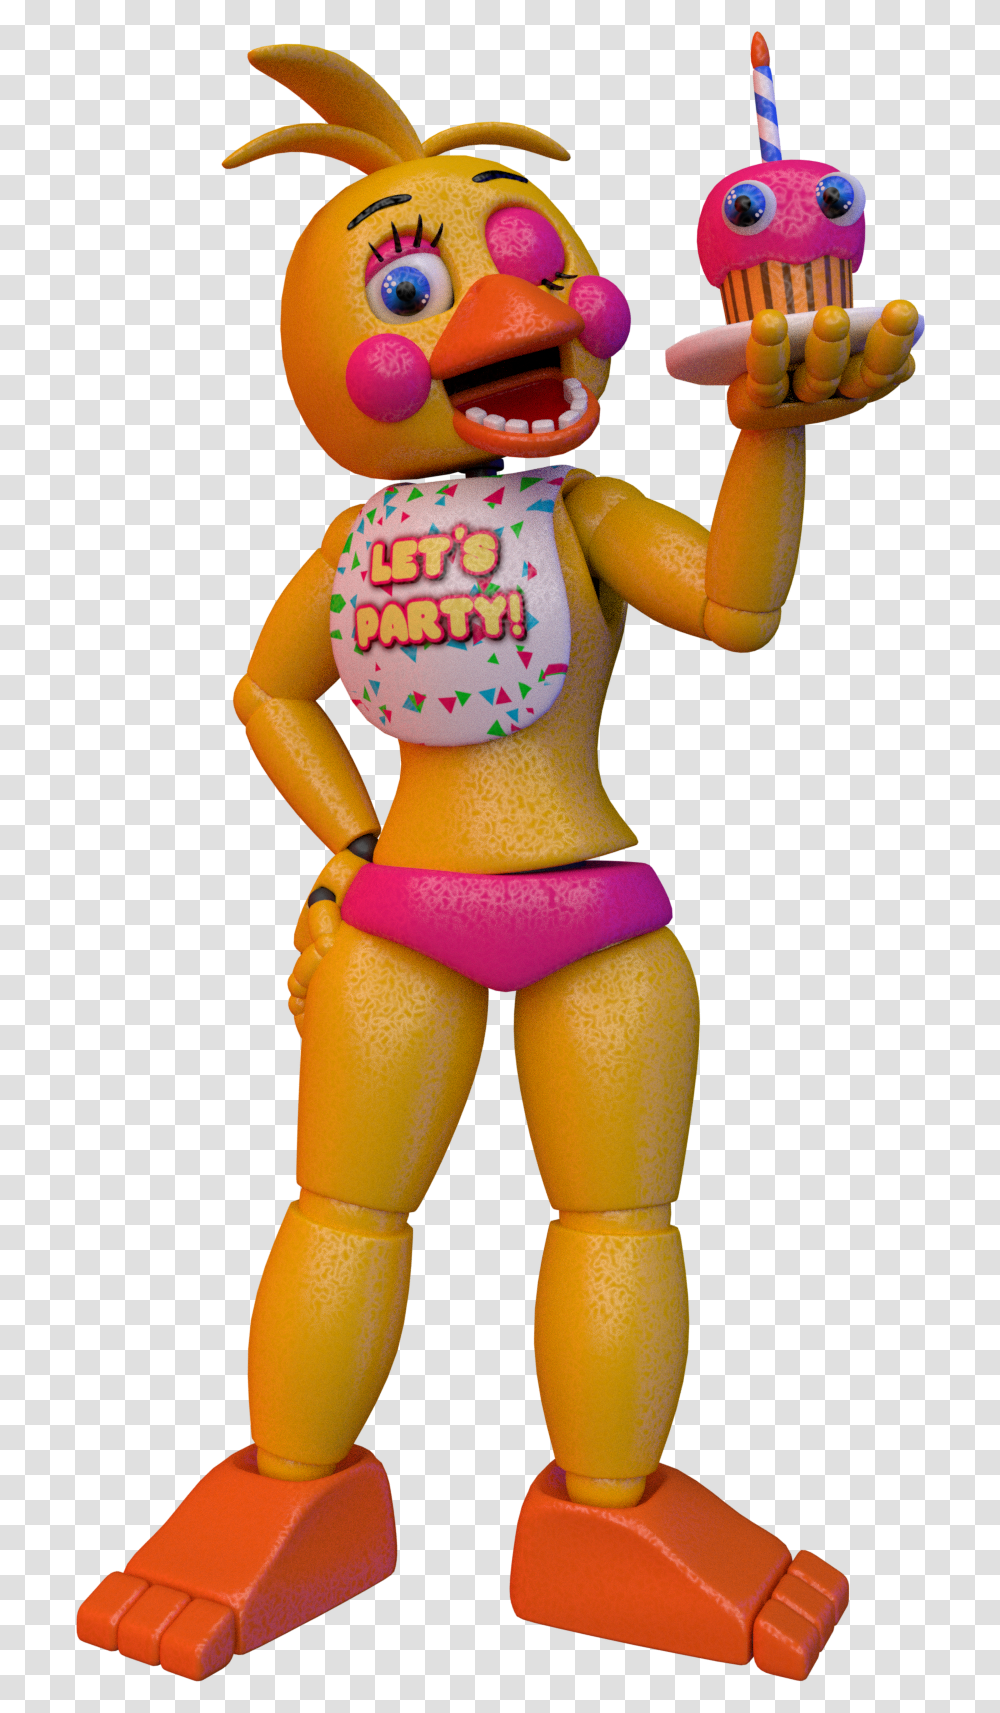 Toy Chica From Fnaf Vr, Doll, Figurine Transparent Png